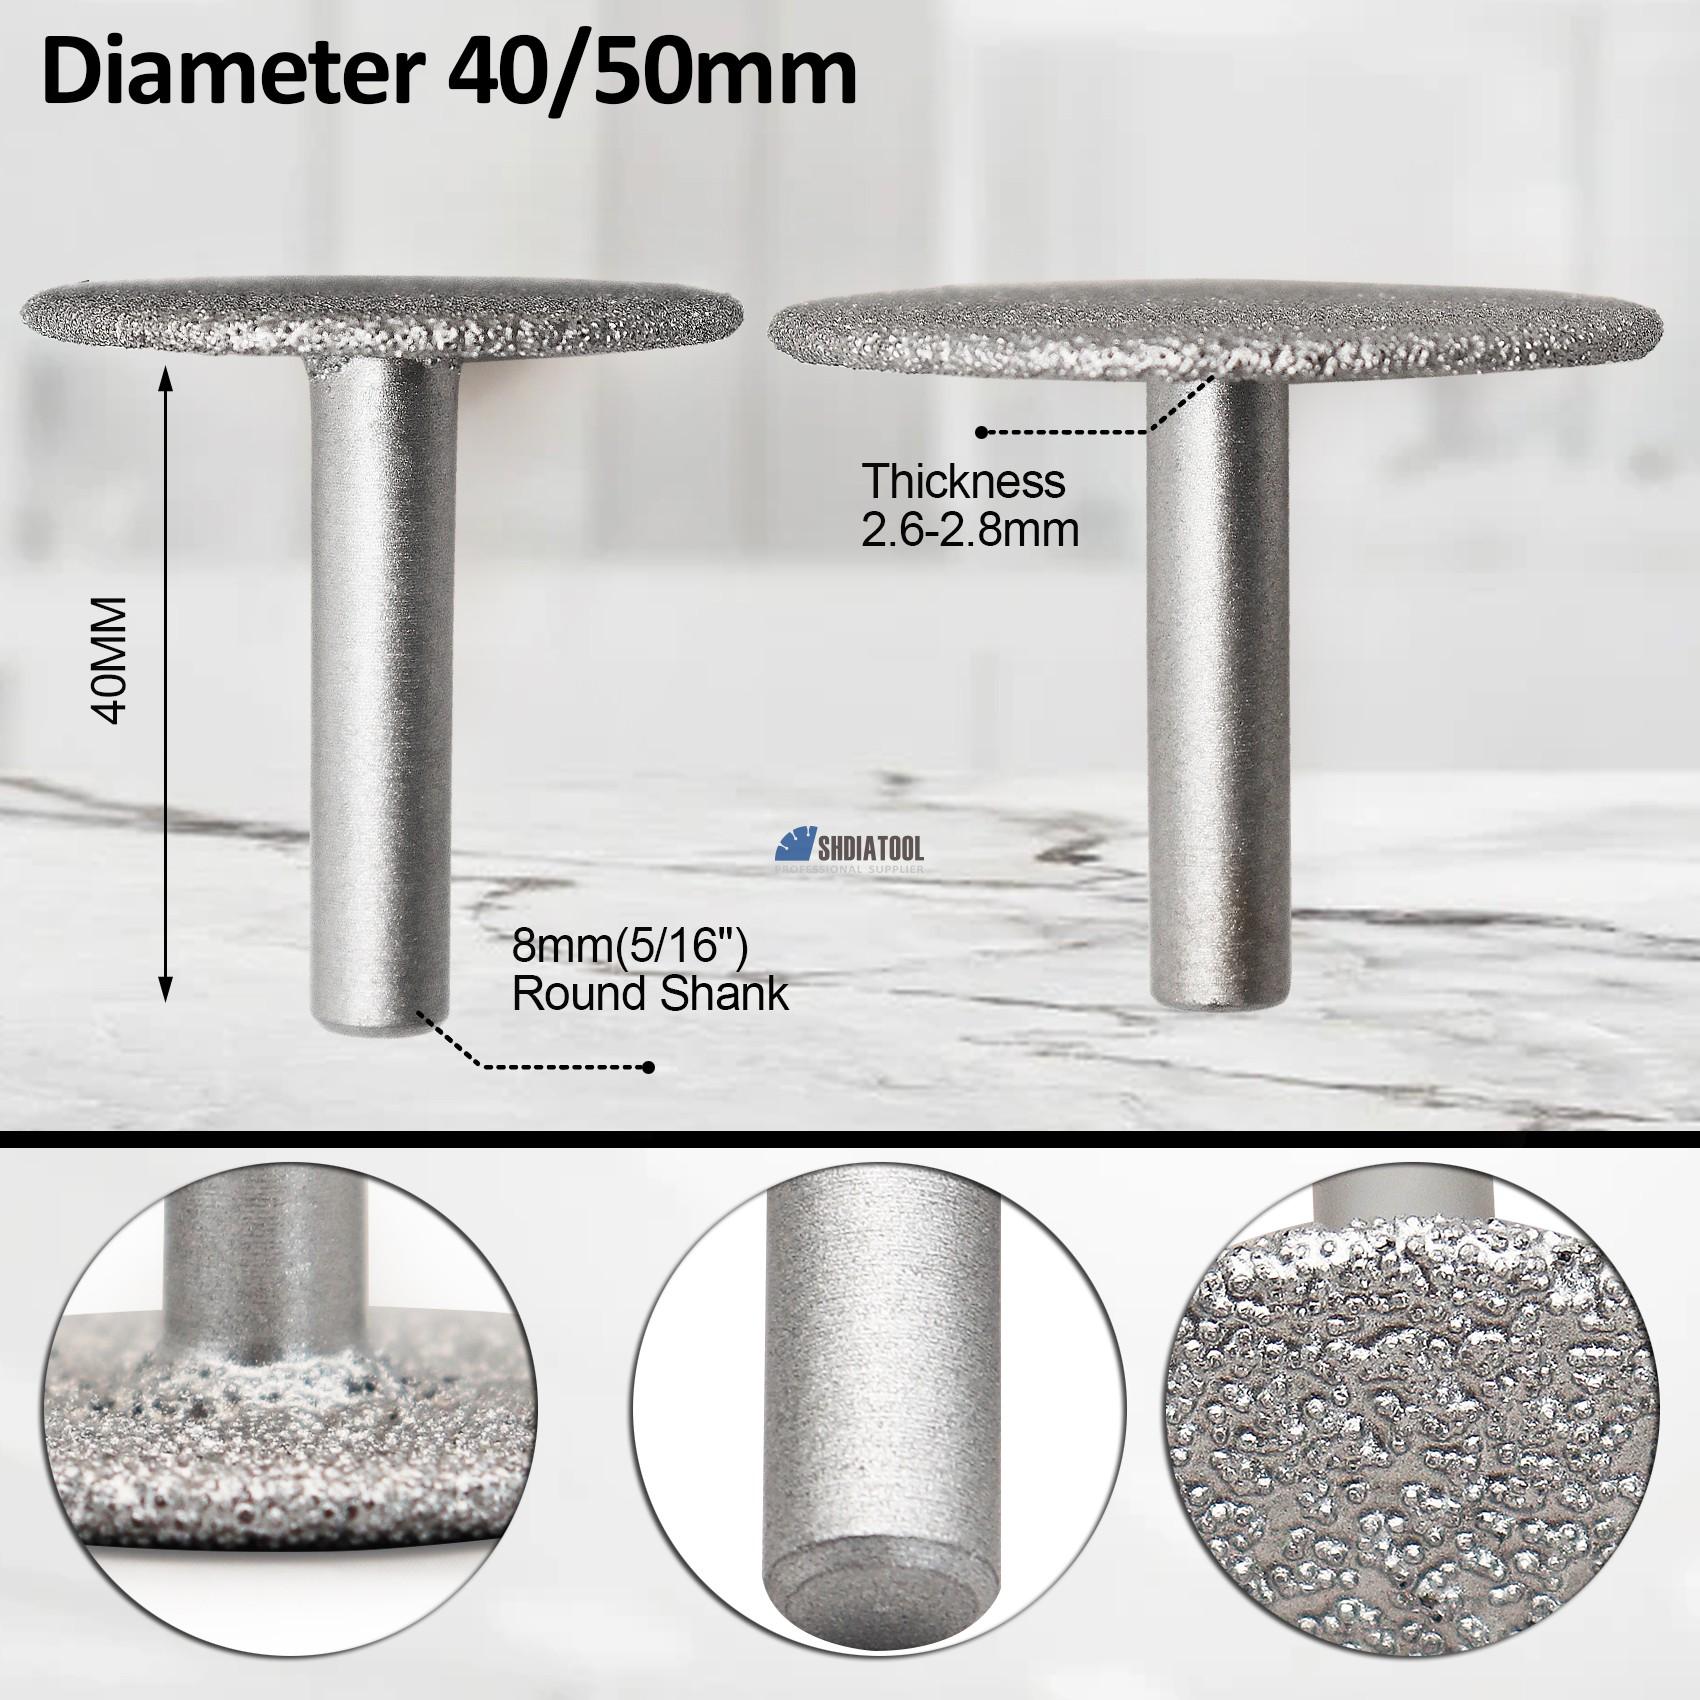 Mini Abrasive Diamond Cutting Disc For Dremel Rotary Cutter Saw Blade Grinding Wheels Disk With Mandrel Tools